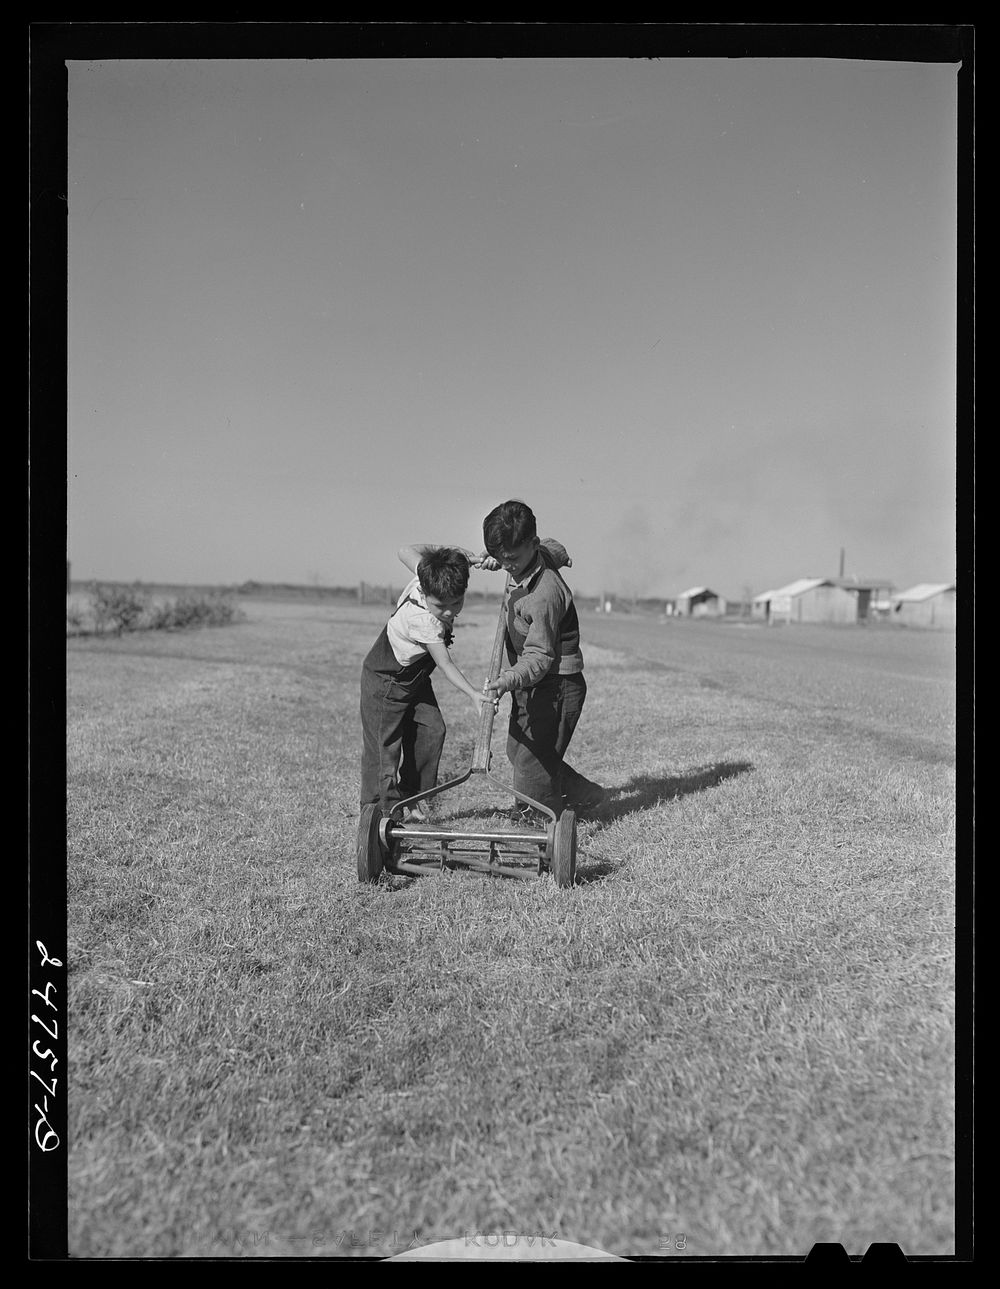 Boys with community lawnmower. FSA (Farm Security Administration) camp. Robstown, Texas. Sourced from the Library of…